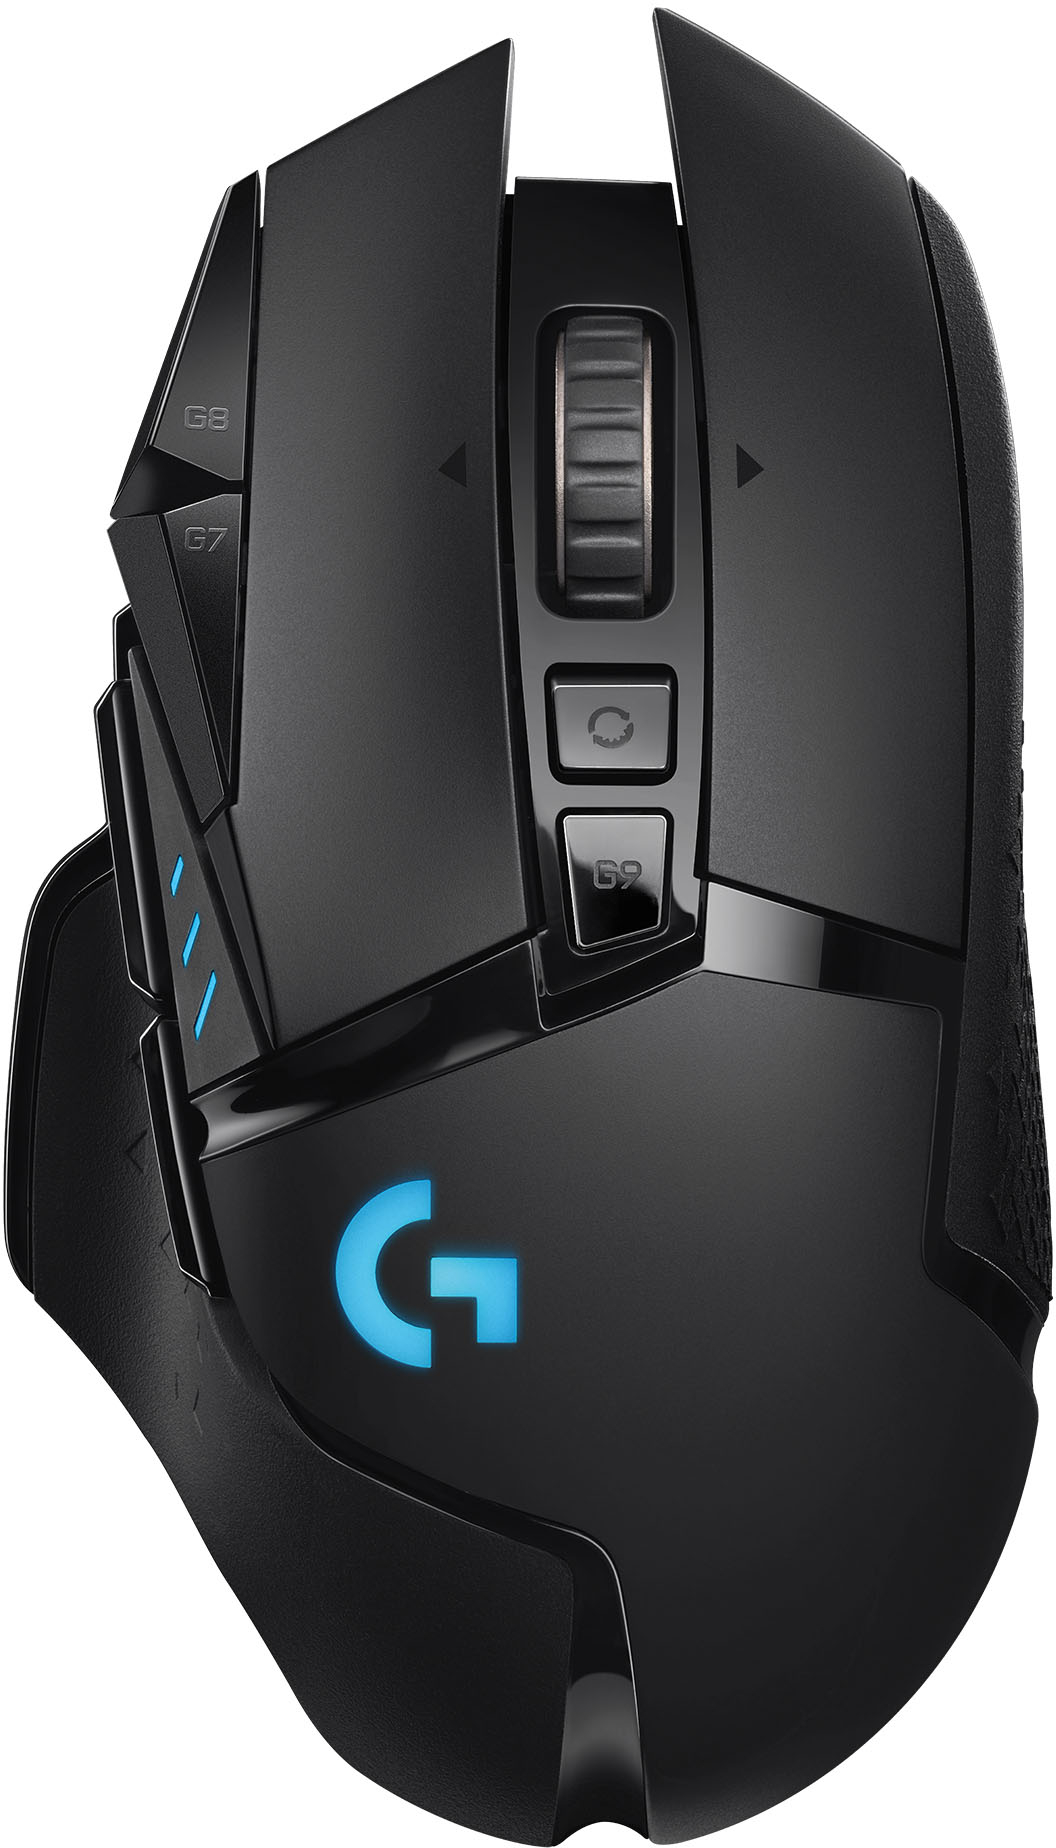 Is a $5 Mouse WORTH IT? Youse Gaming Mouse(AIDENTEC) 